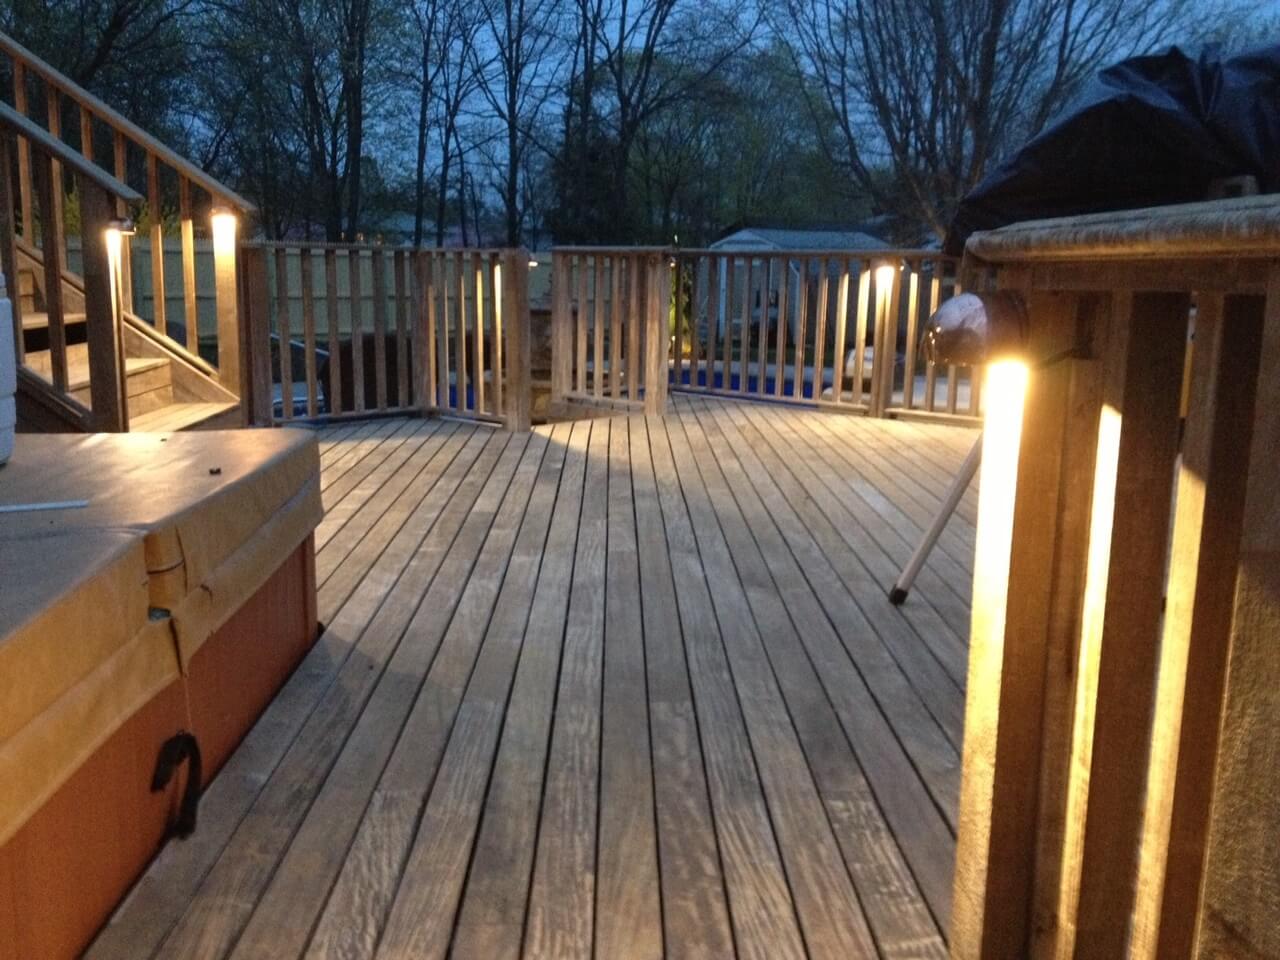 Deck with railing and lights for safety